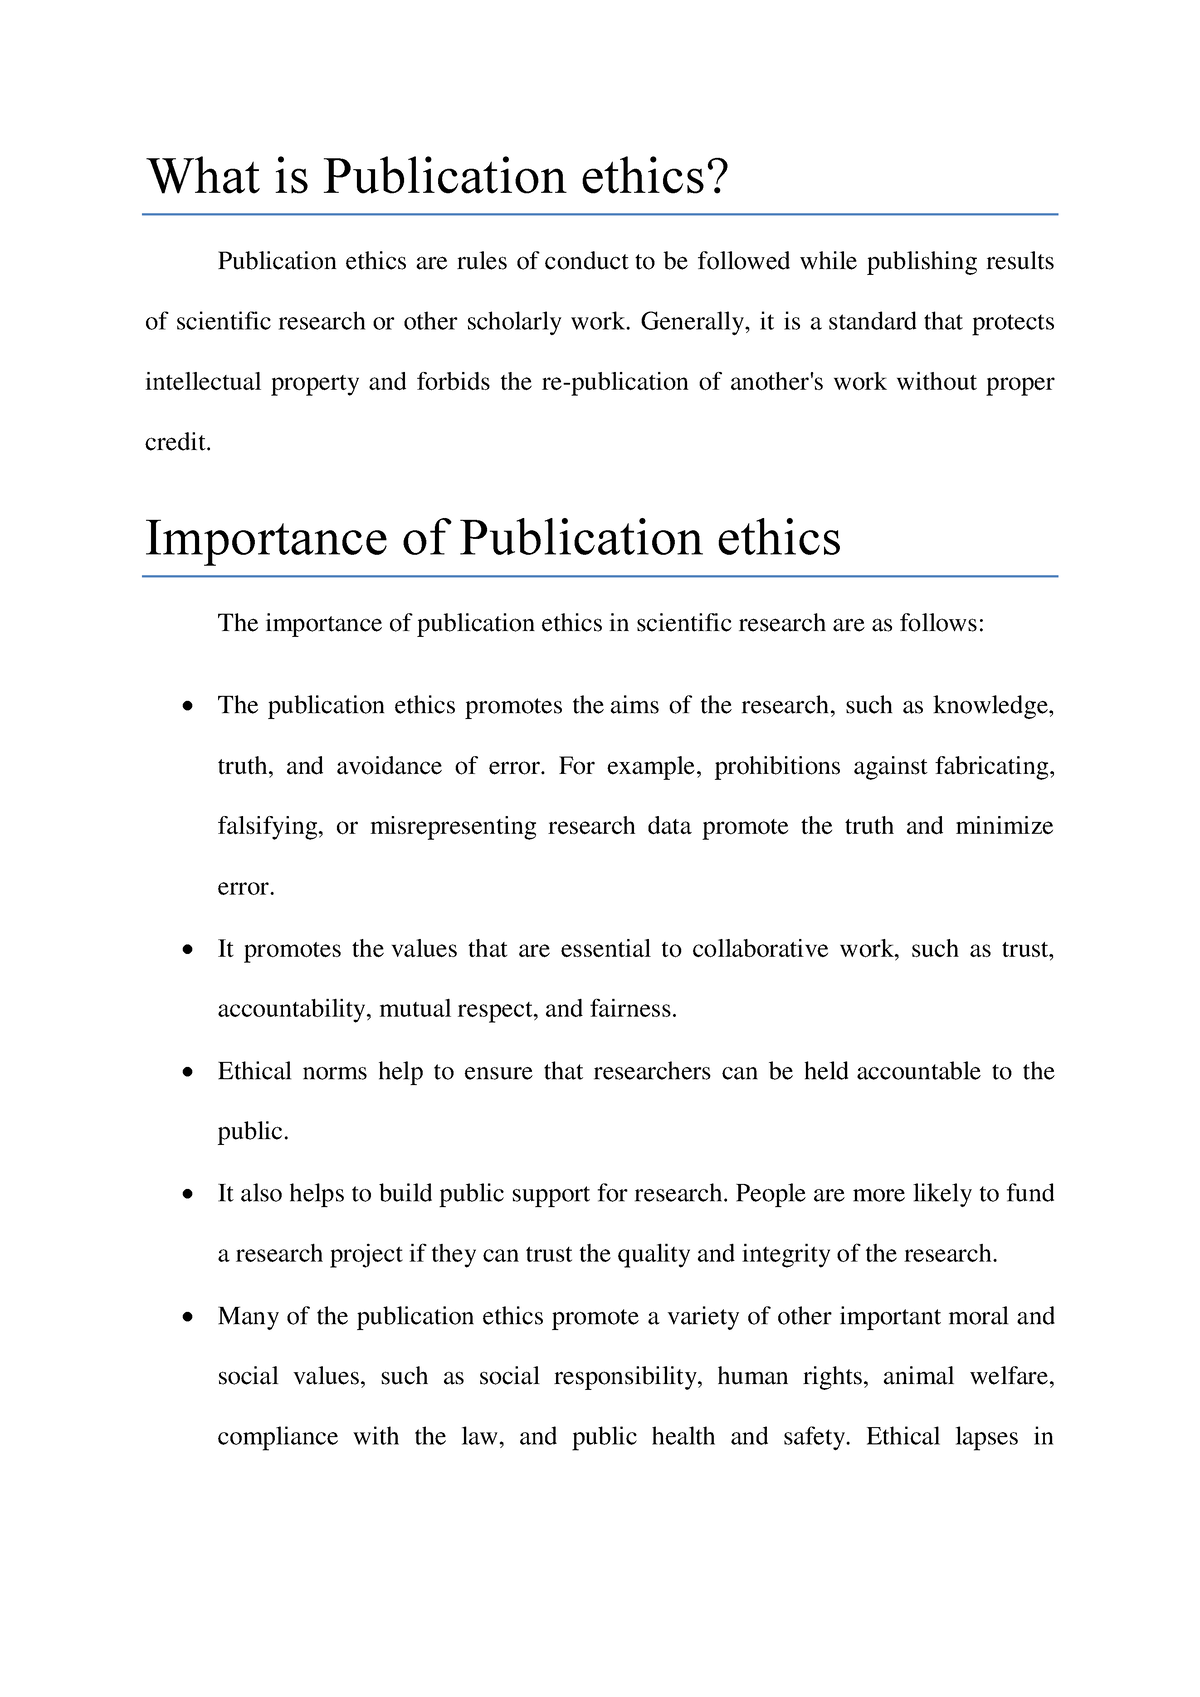 research ethics study notes